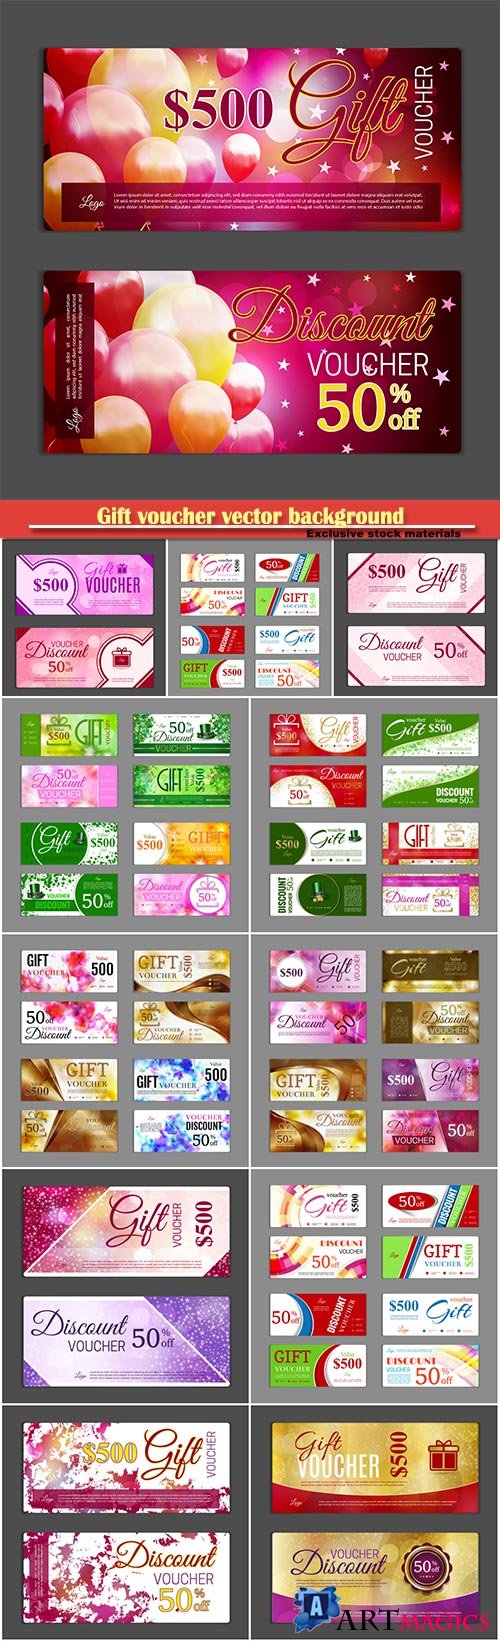 Gift voucher vector background, shopping cards, discount coupon, banner, discount card # 7